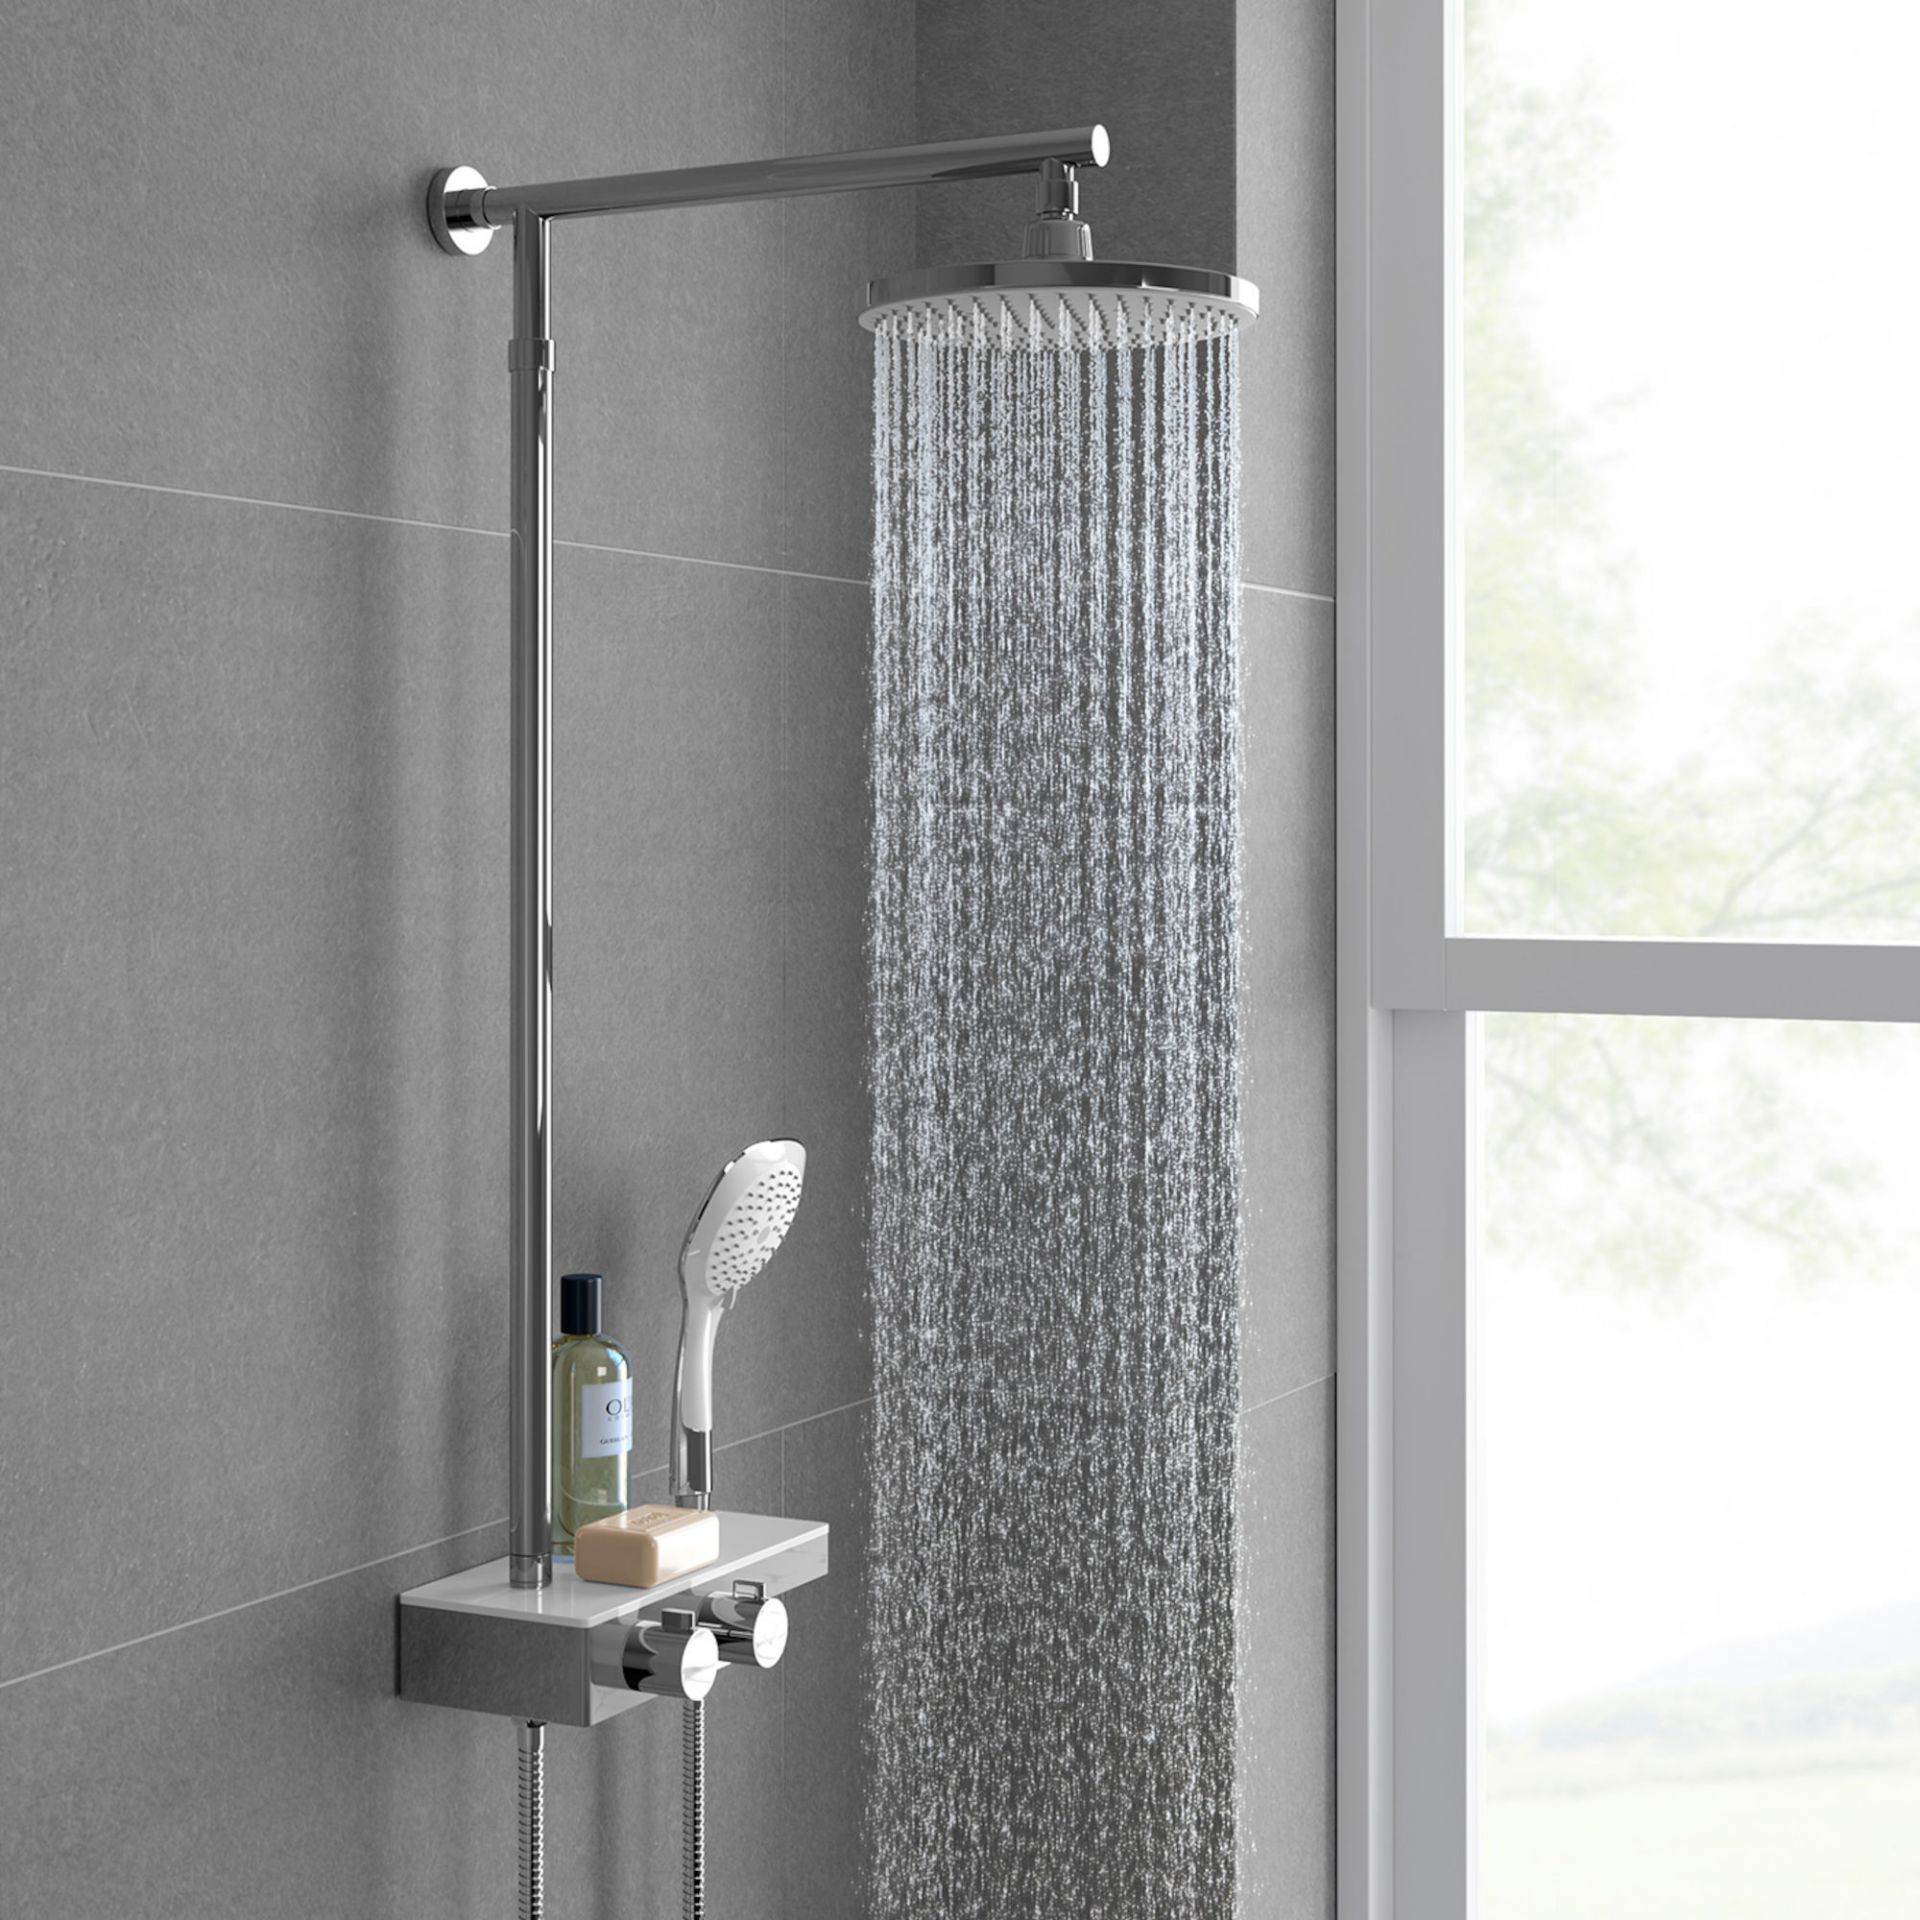 (LL70) Round Exposed Thermostatic Mixer Shower Kit Medium Head & Shelf. Cool to touch shower for